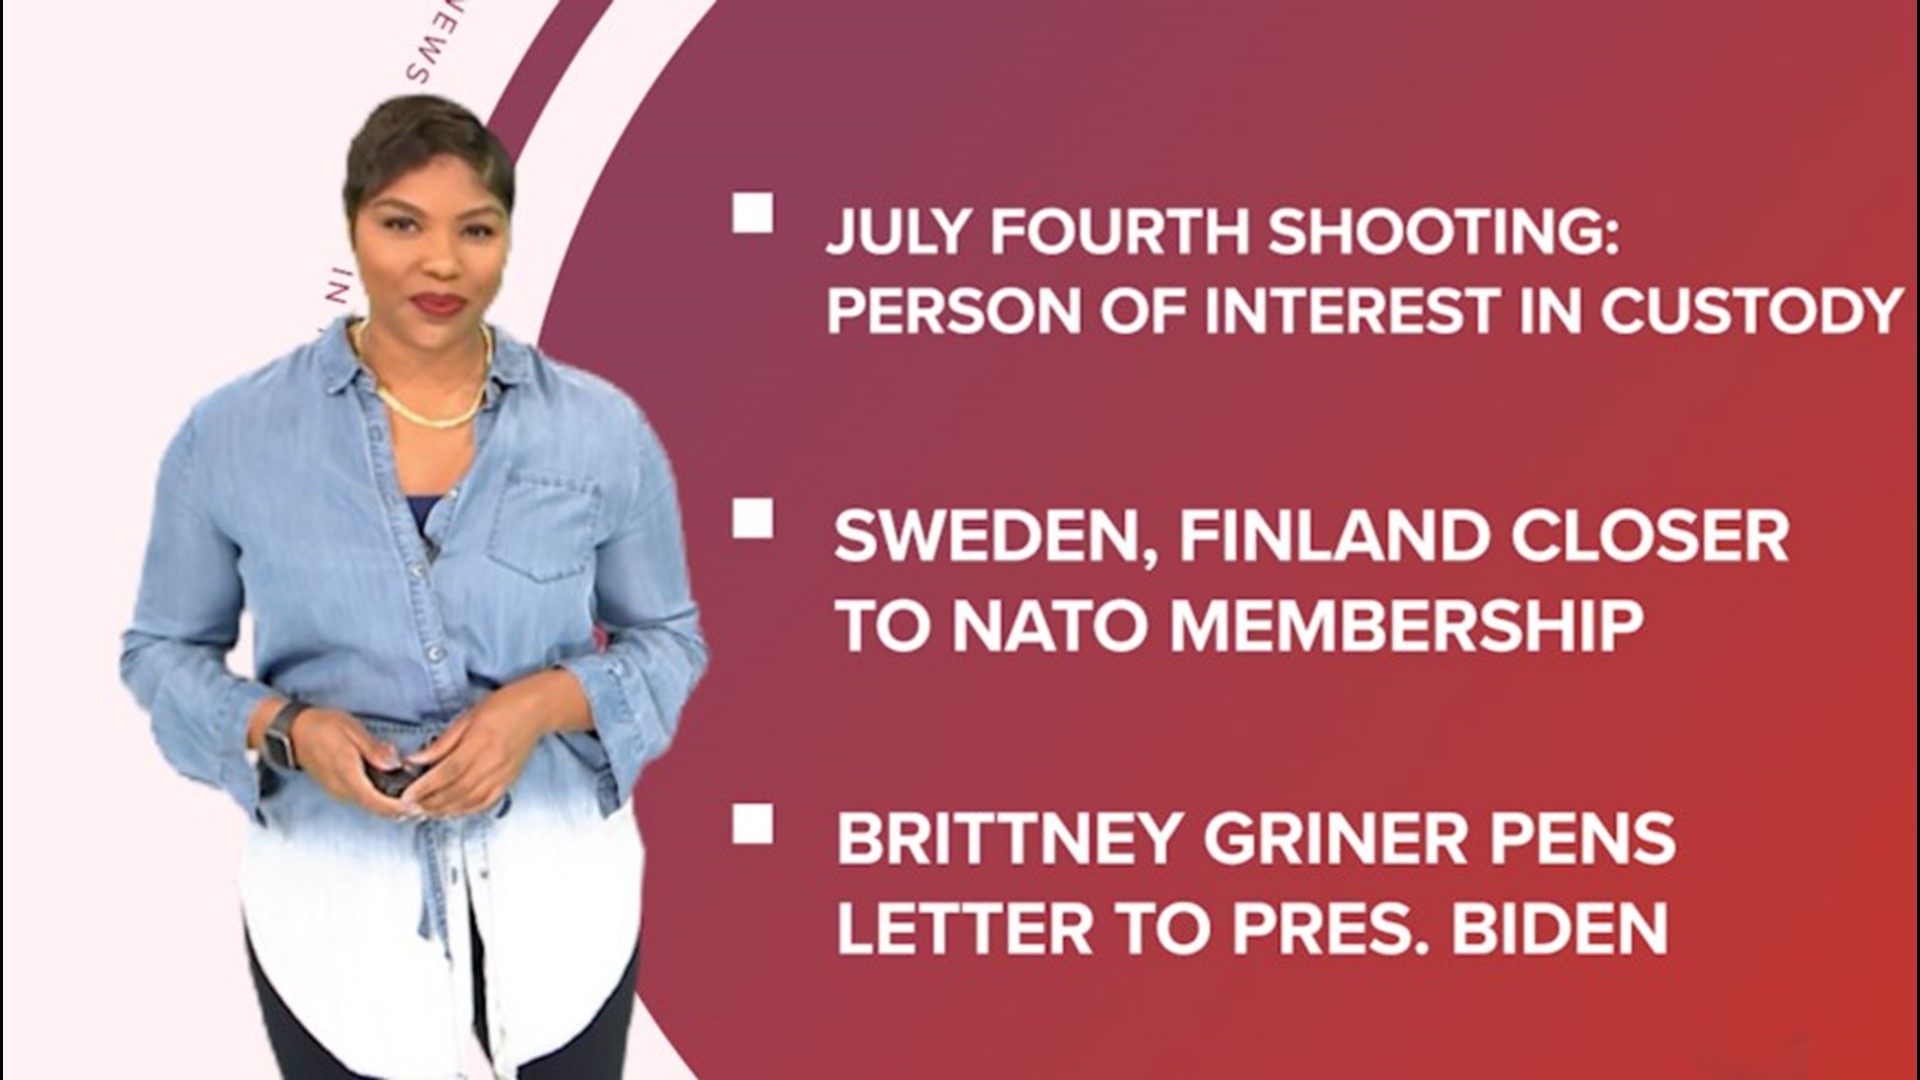 A look at what is happening around the U.S., from a mass shooting on July 4th to a deadly police shooting leading to protests and a WNBA star's plea for help.